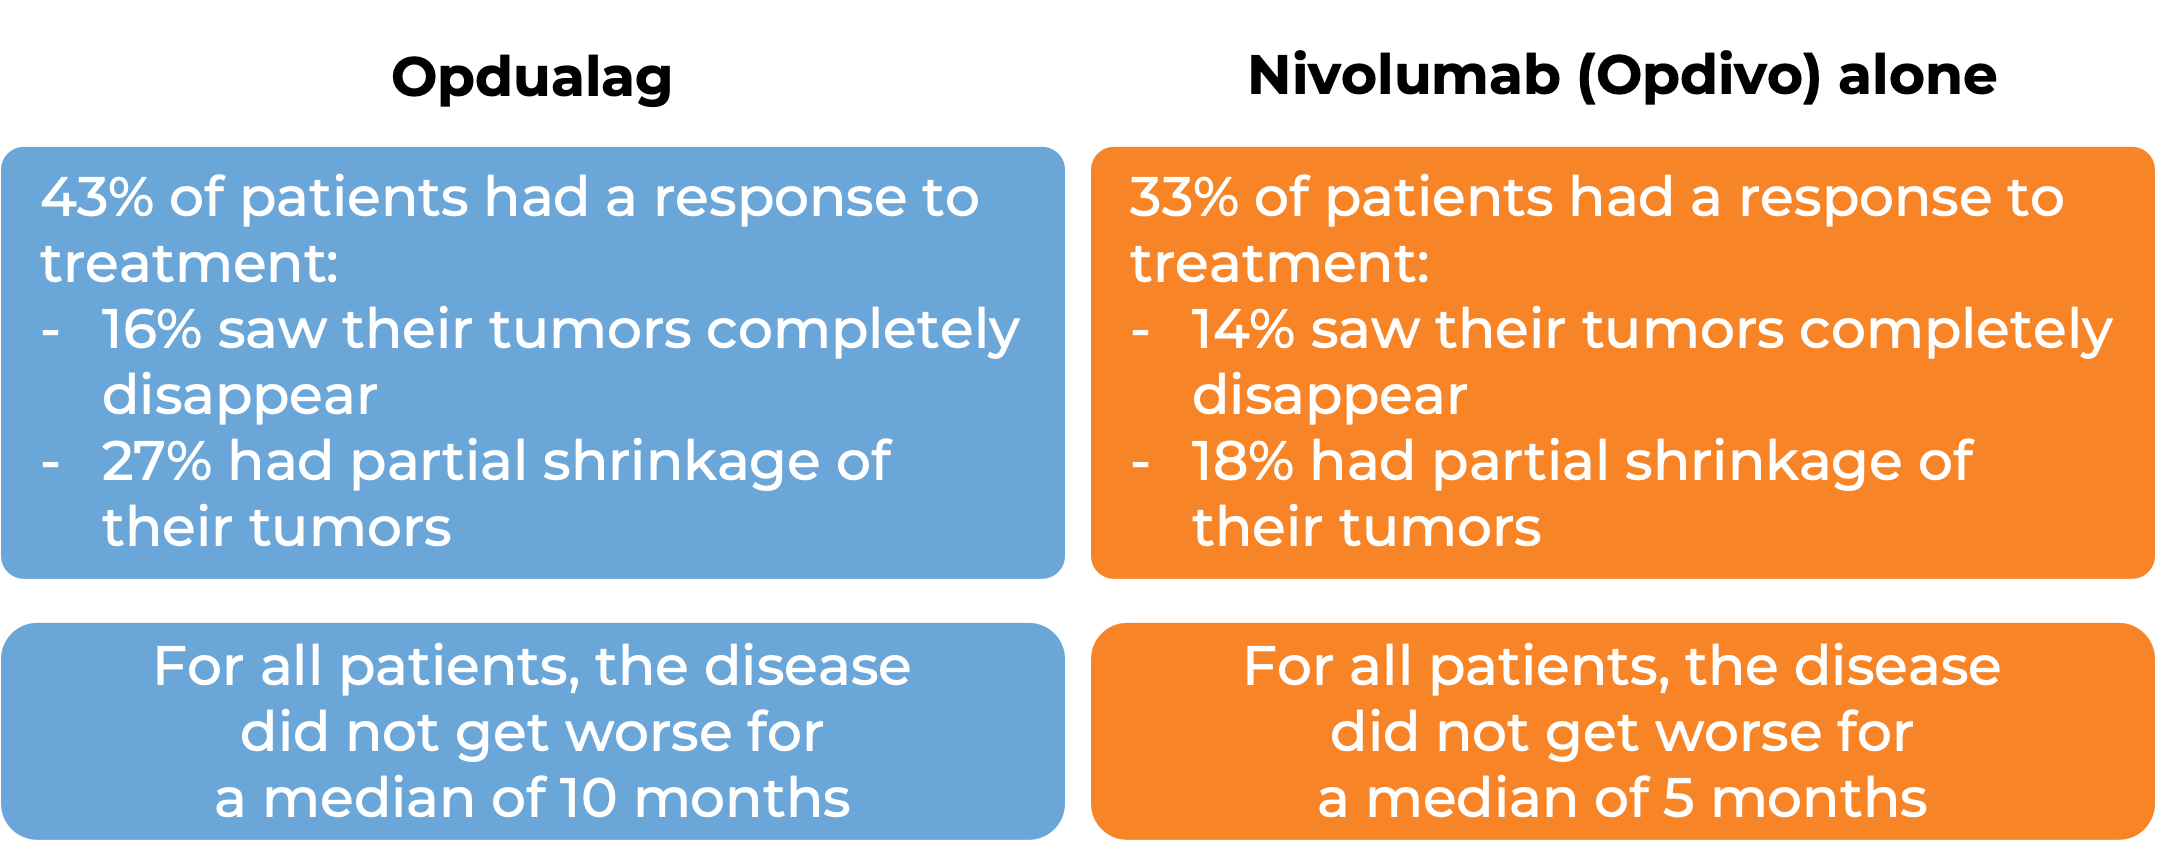 Results after treatment with Opdualag vs Opdivo alone (diagram)